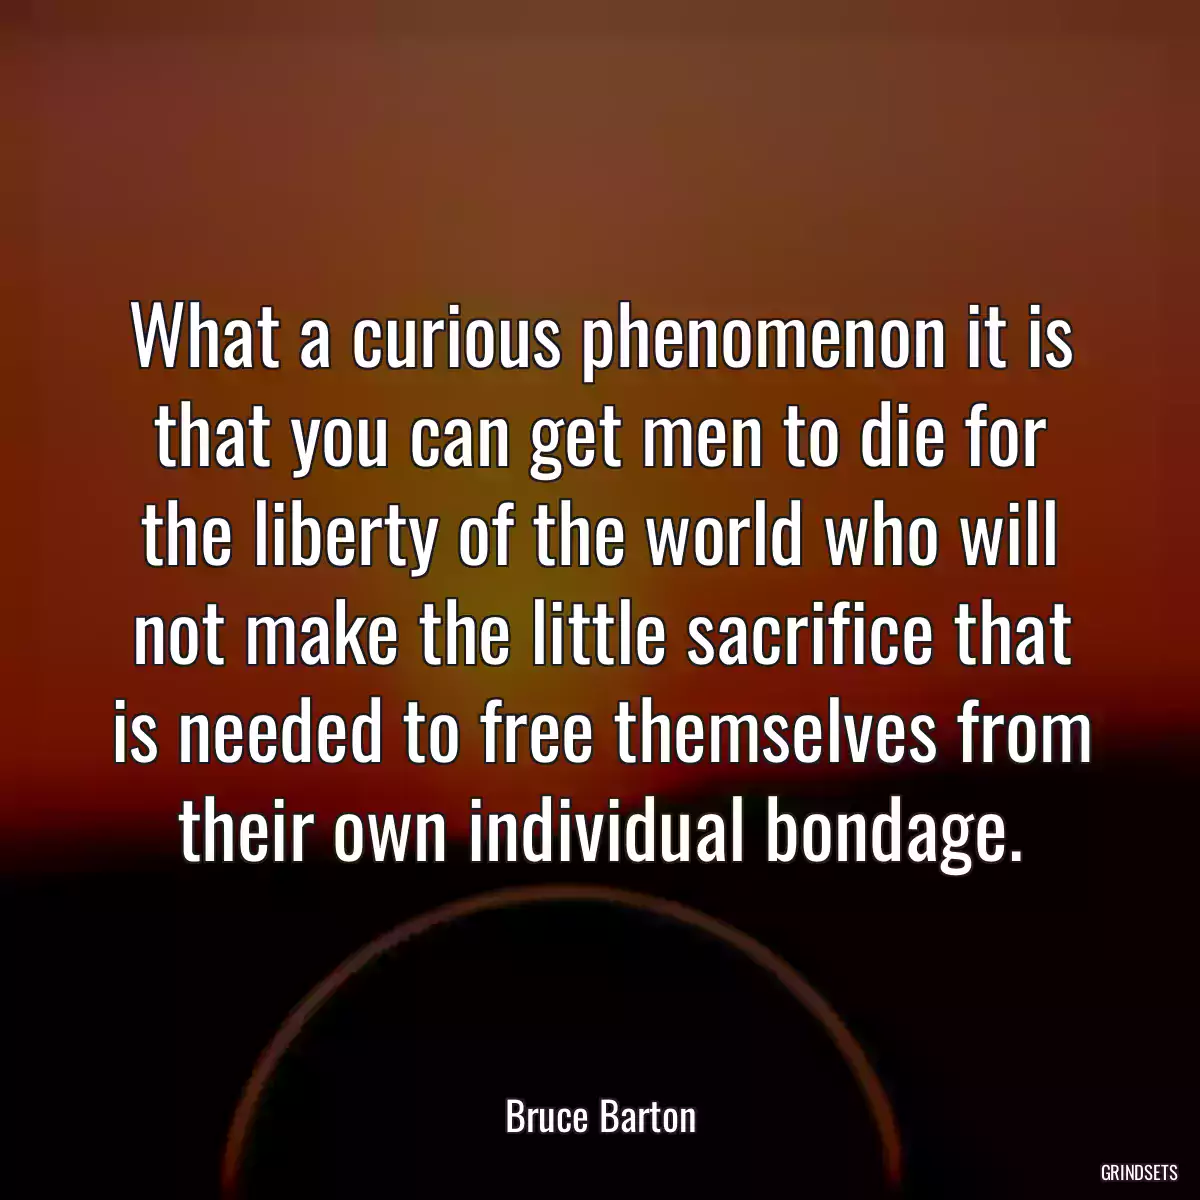 What a curious phenomenon it is that you can get men to die for the liberty of the world who will not make the little sacrifice that is needed to free themselves from their own individual bondage.